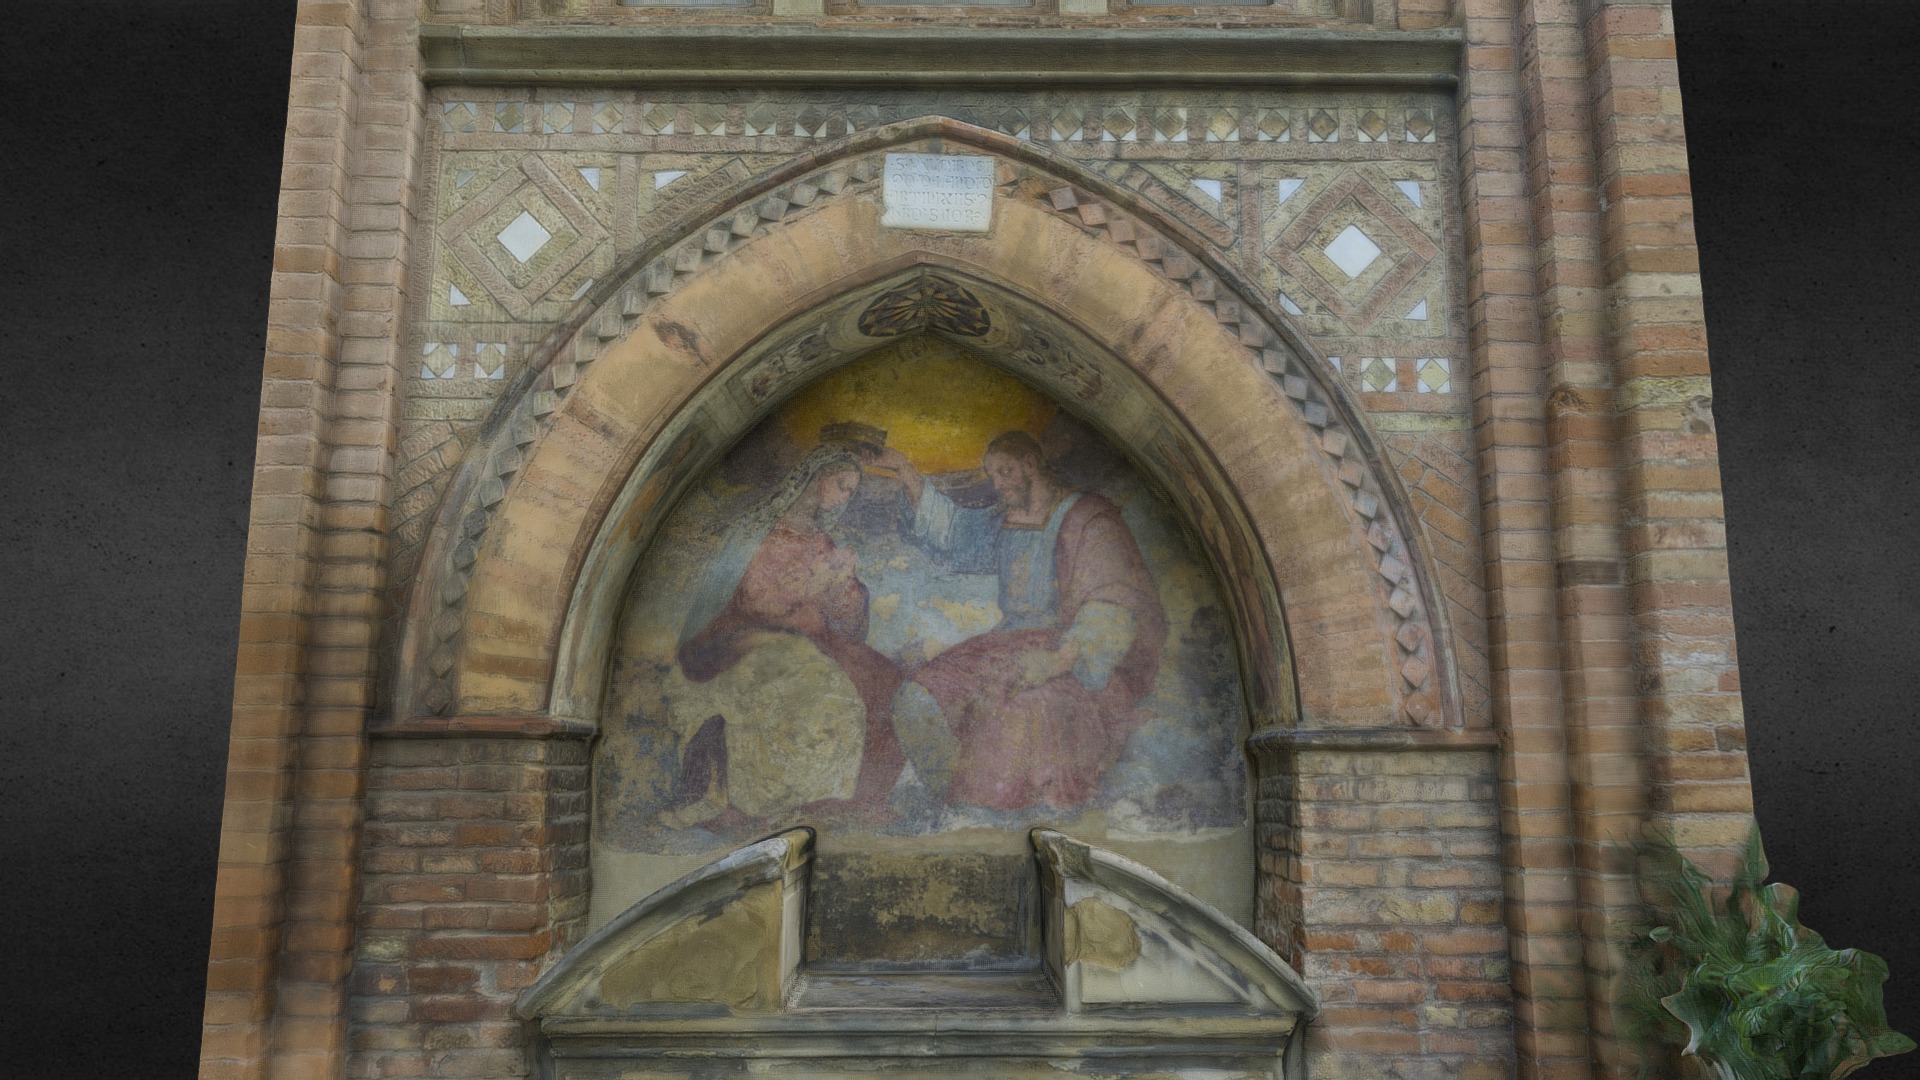 3D model 2017 – Santo Stefano – Bologna - This is a 3D model of the 2017 - Santo Stefano - Bologna. The 3D model is about a painting on a wall.